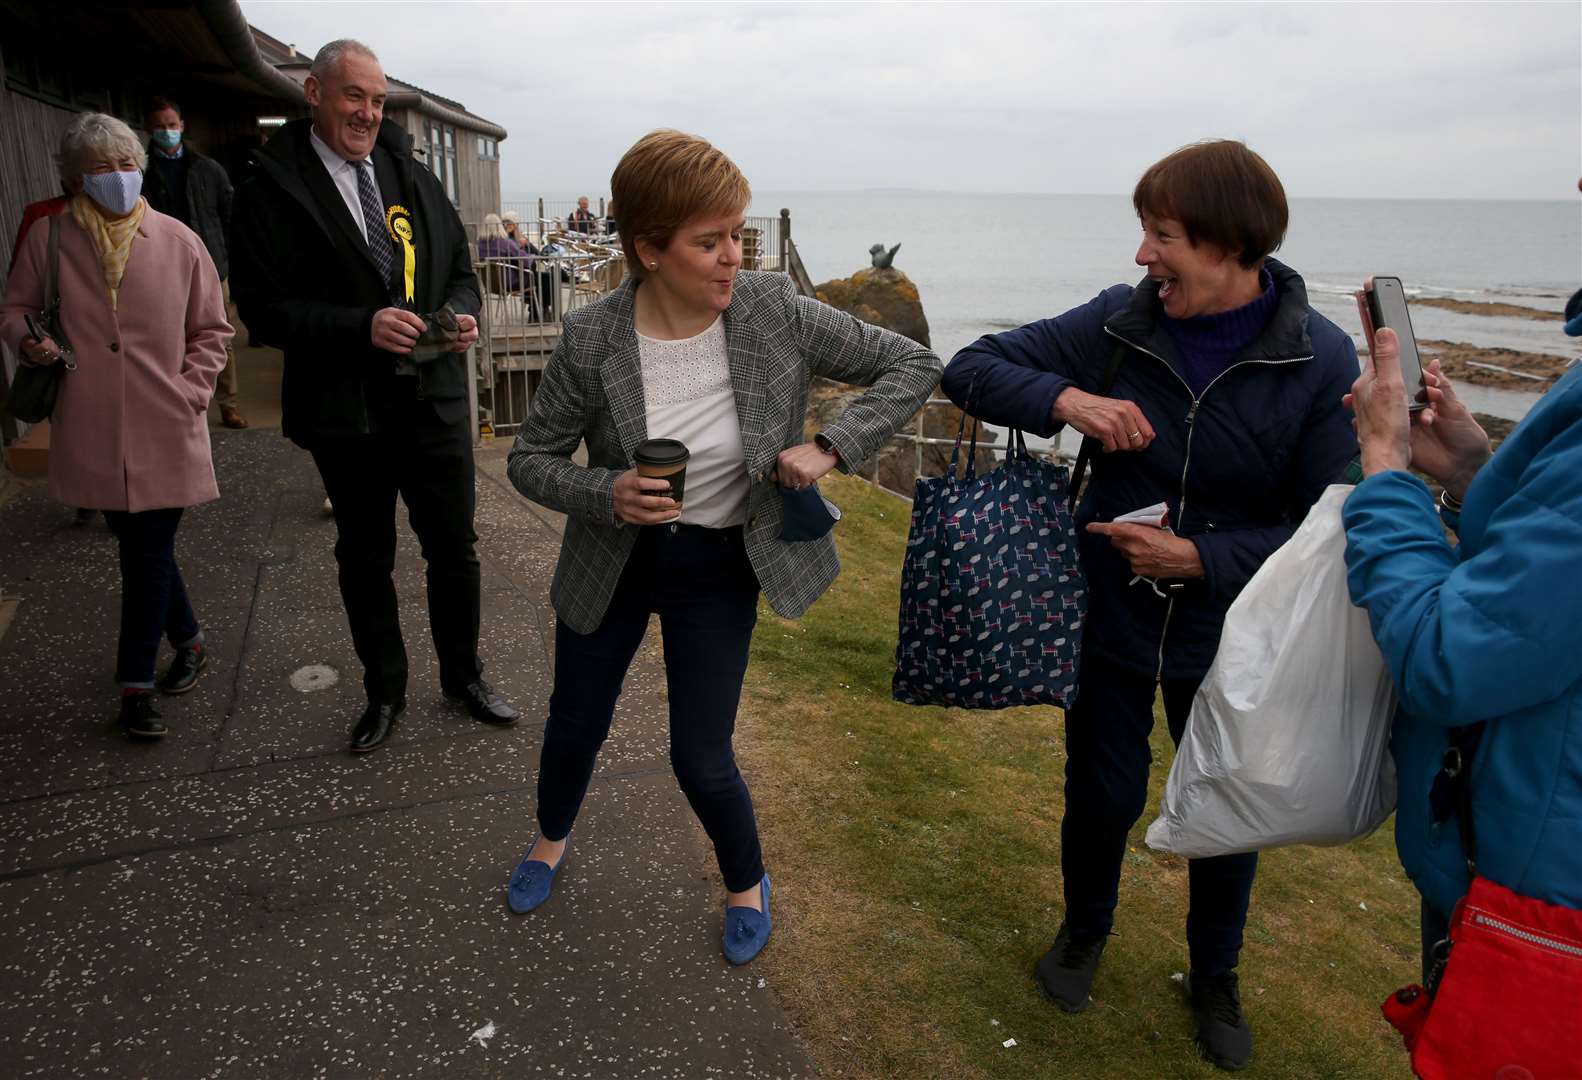 Nicola Sturgeon greets a supporter with an elbow bump on the campaign trail in North Berwick (Andrew Milligan/PA)